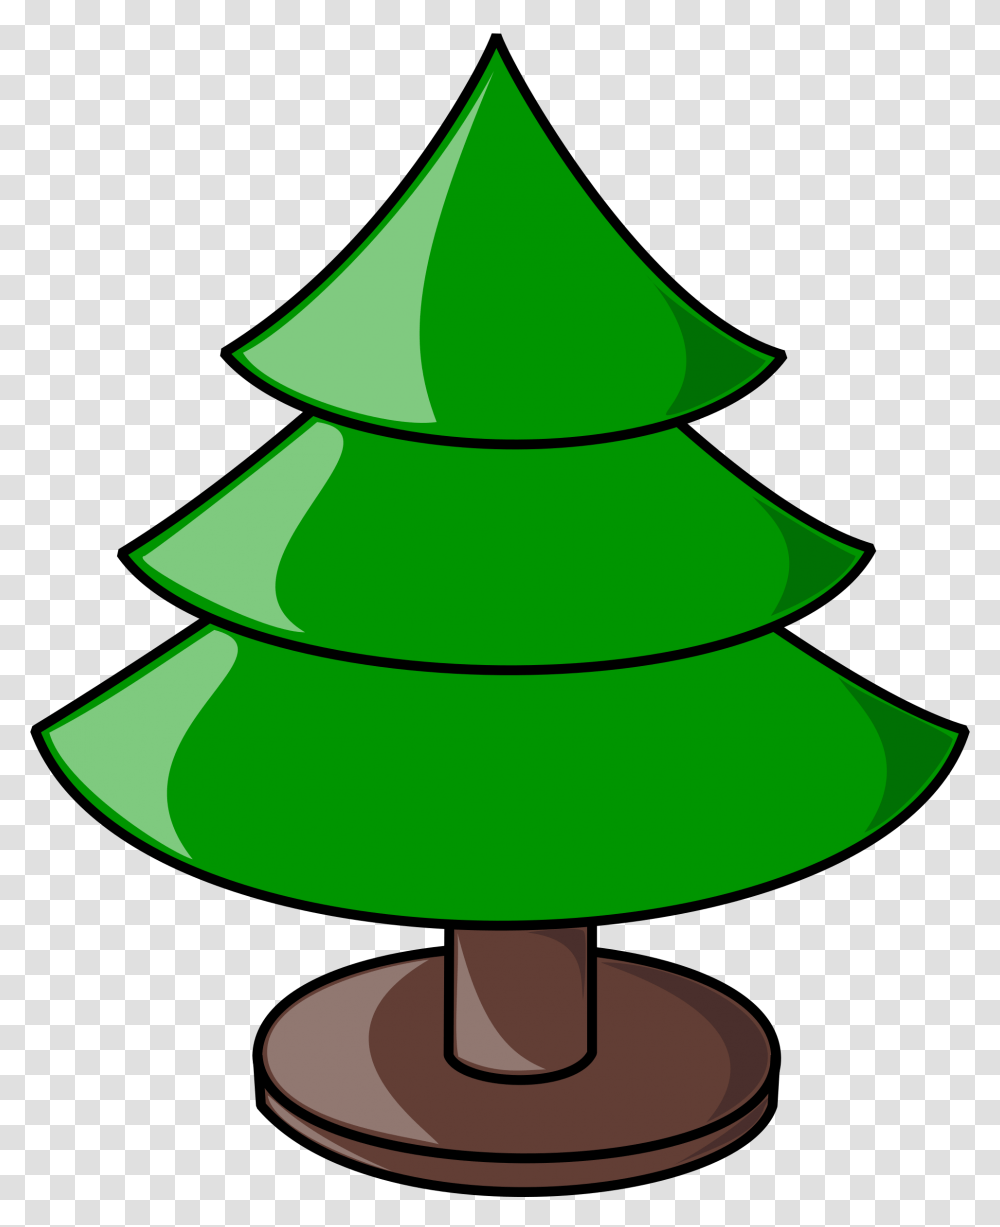 Clip Art Weight, Plant, Lamp, Tree, Ornament Transparent Png